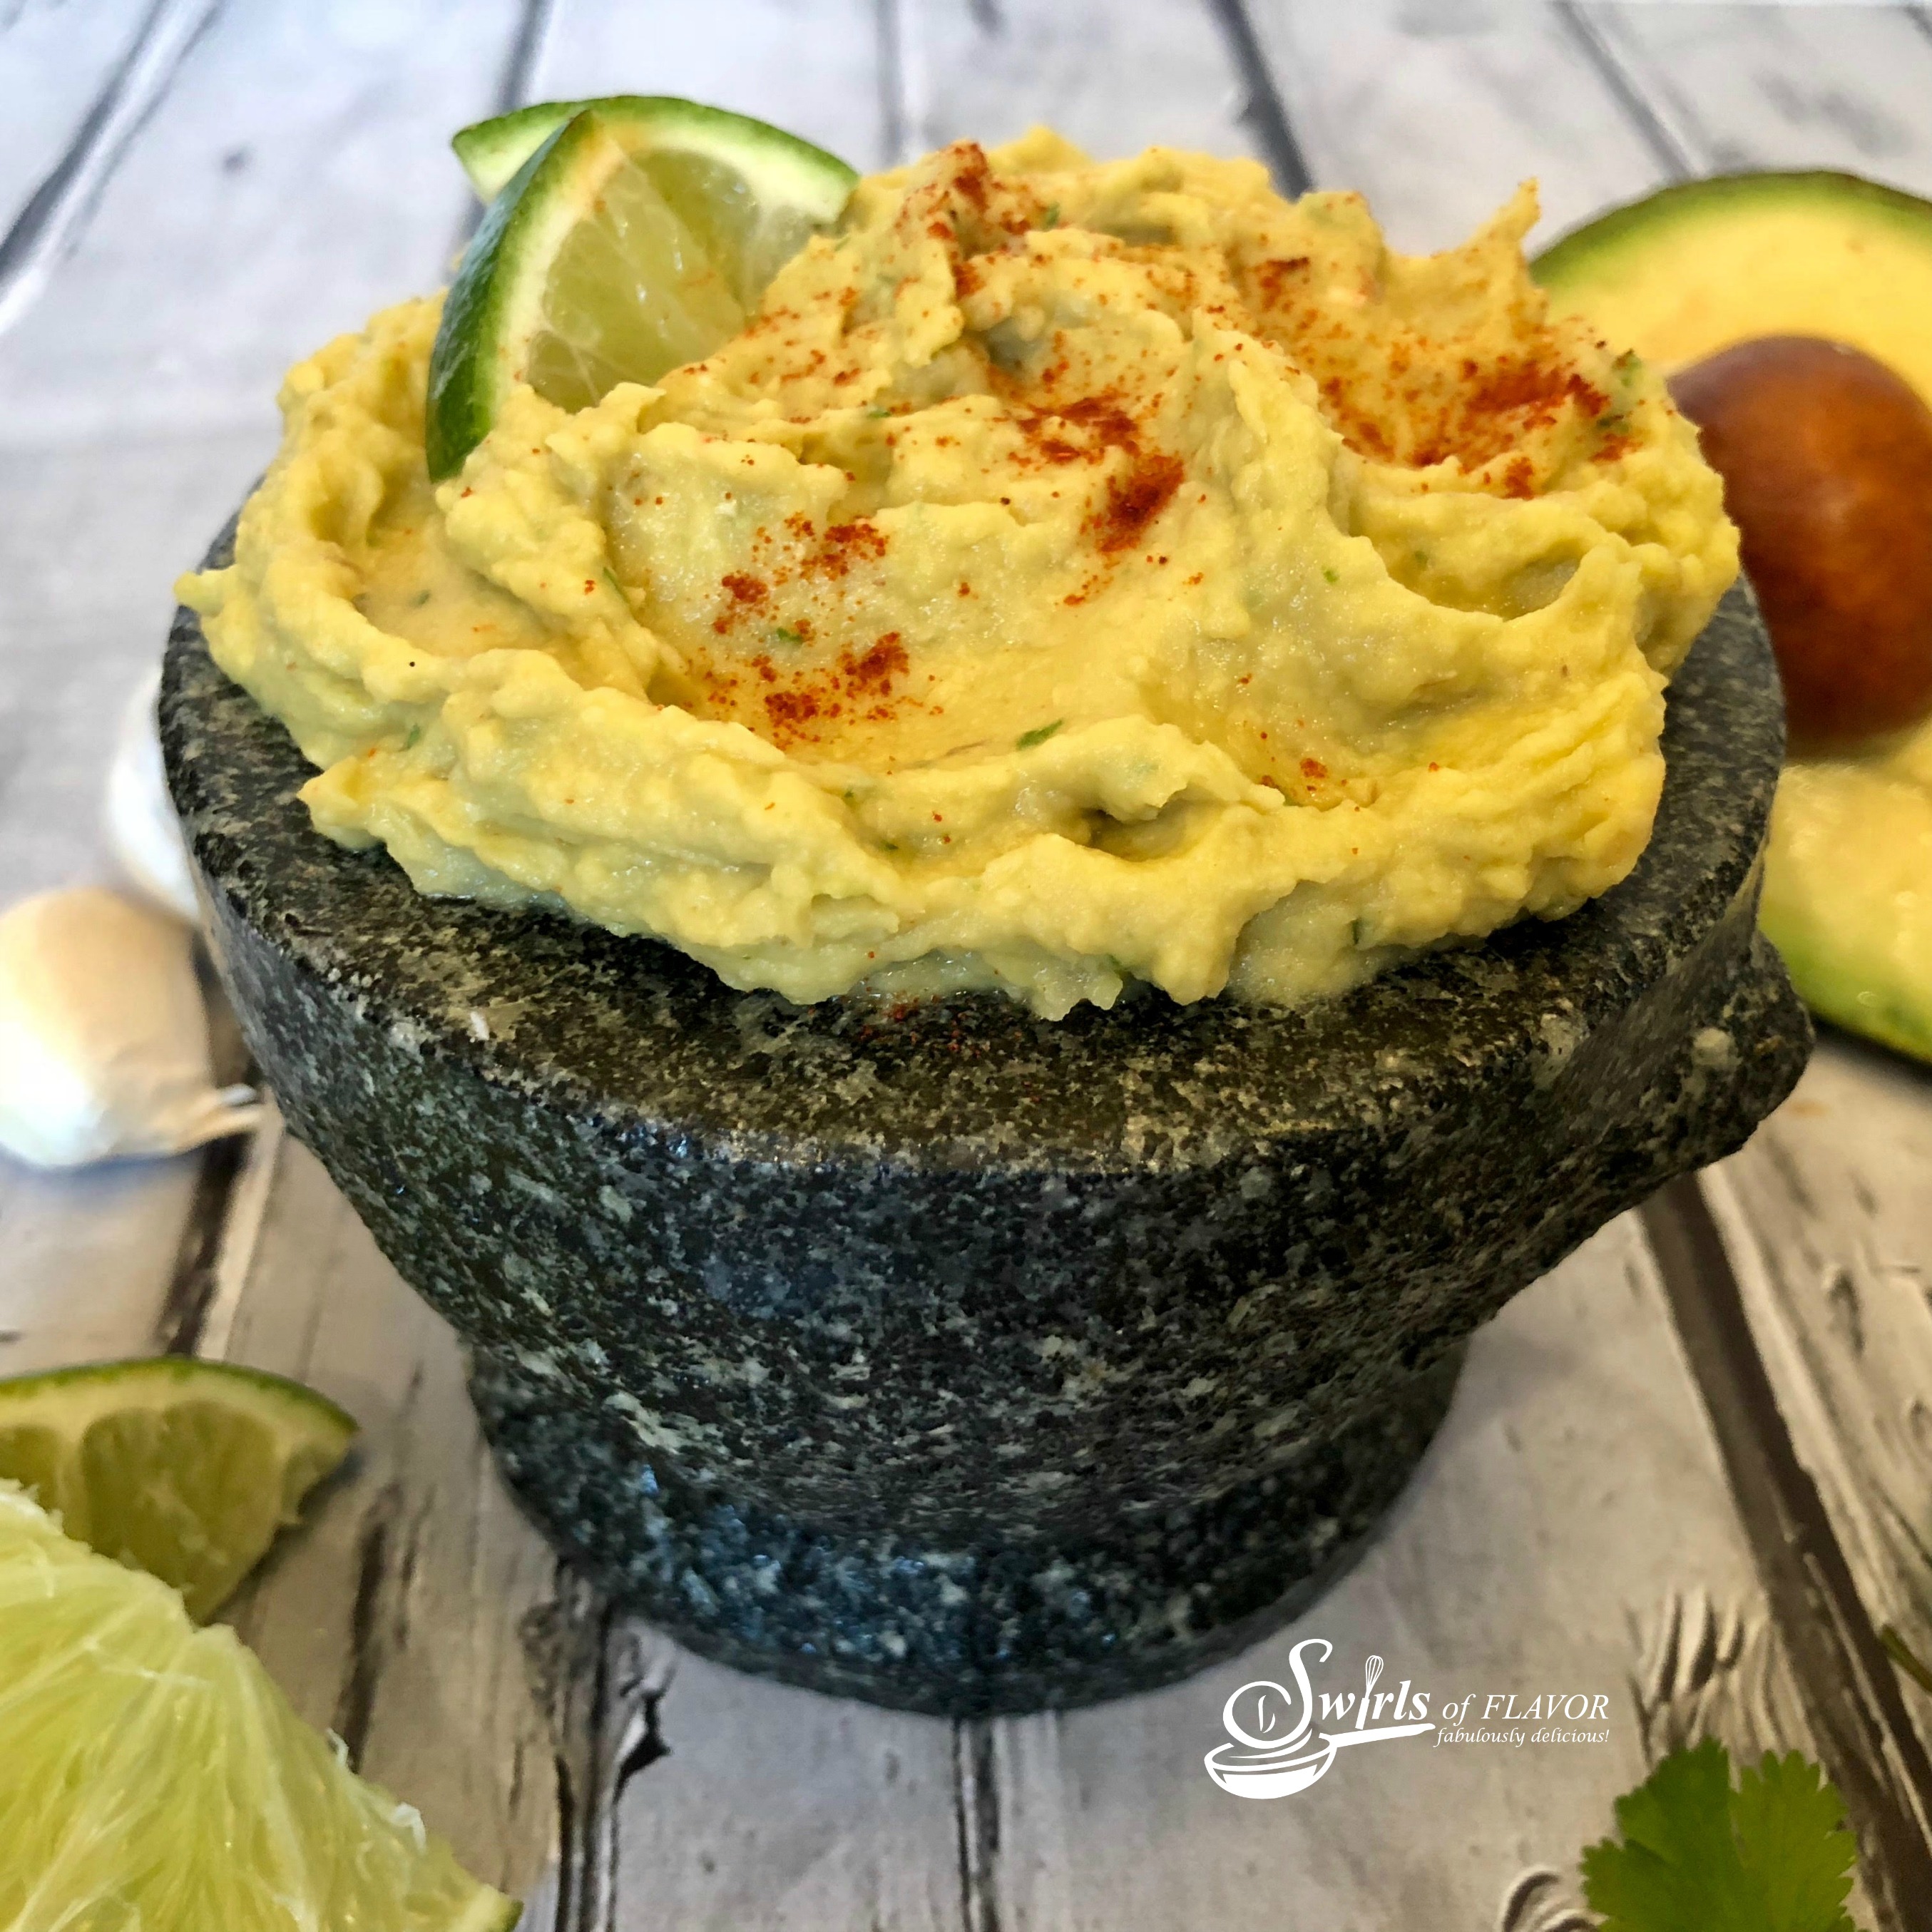 avocado hummus served in a mortar and pestle